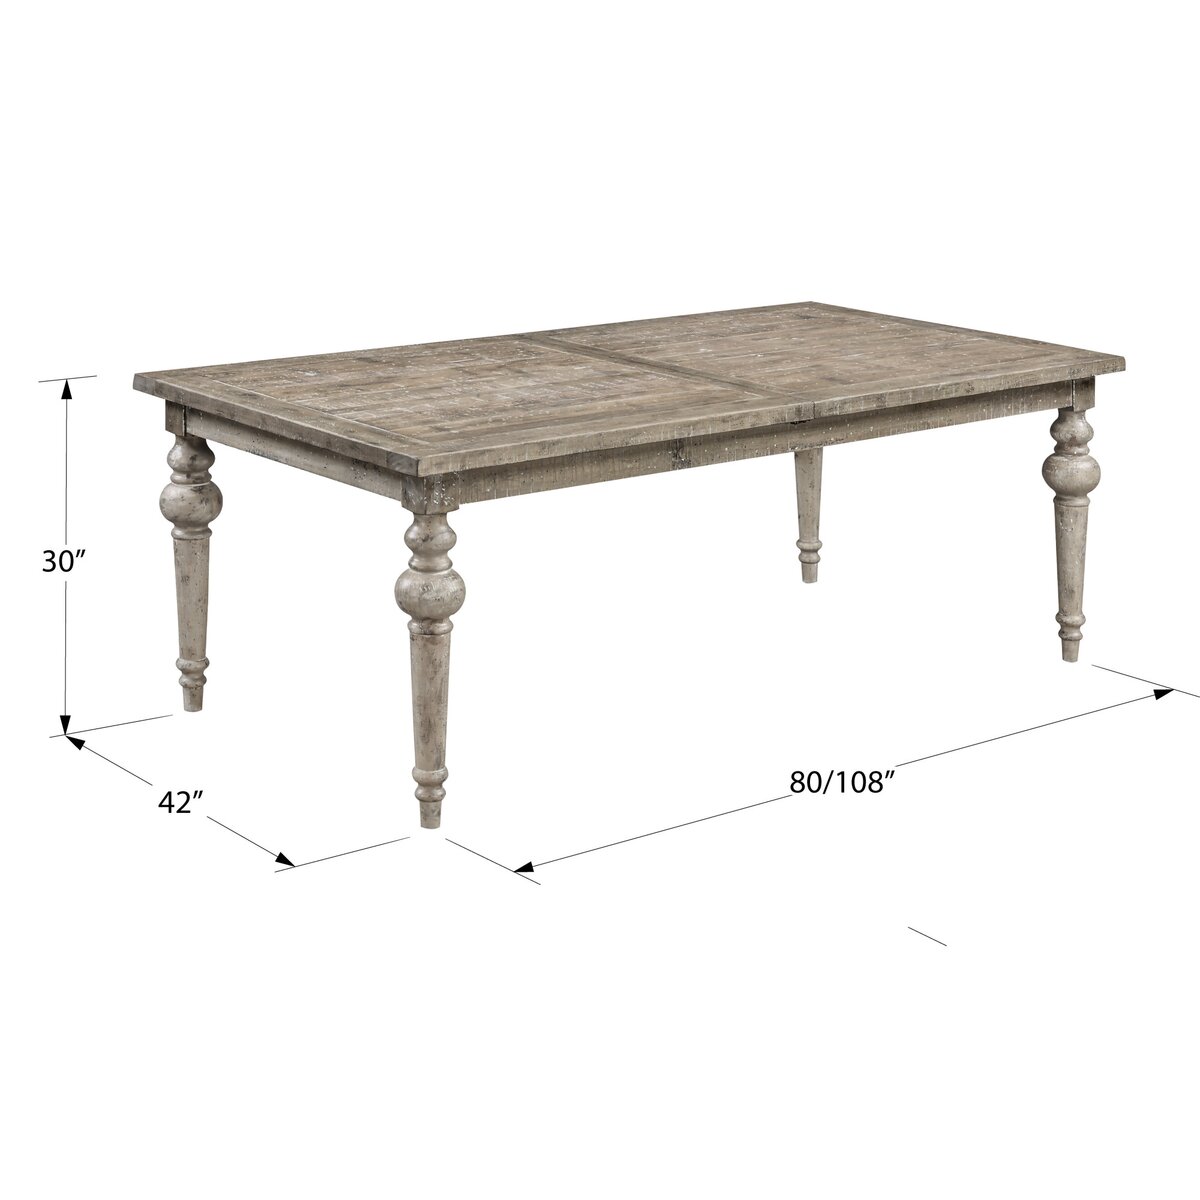 Three Posts™ Clintwood Solid Wood Dining Table & Reviews | Wayfair